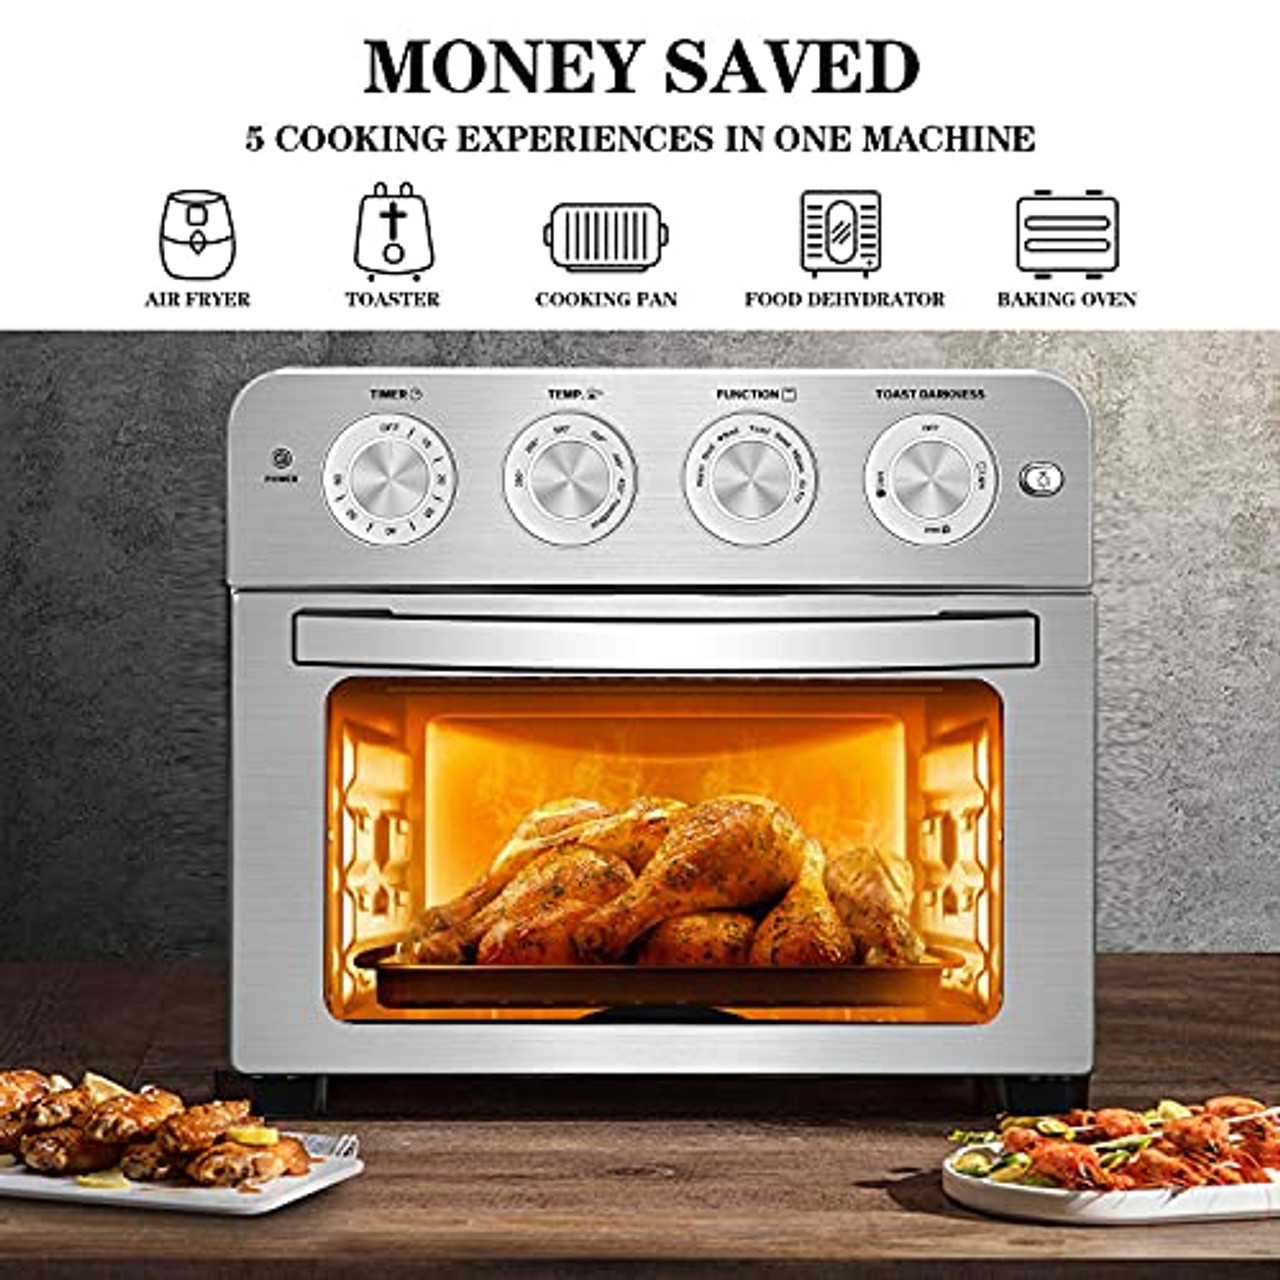 Geek Chef Air Fryer Toaster Oven Combo, 4 Slice Toaster Convection